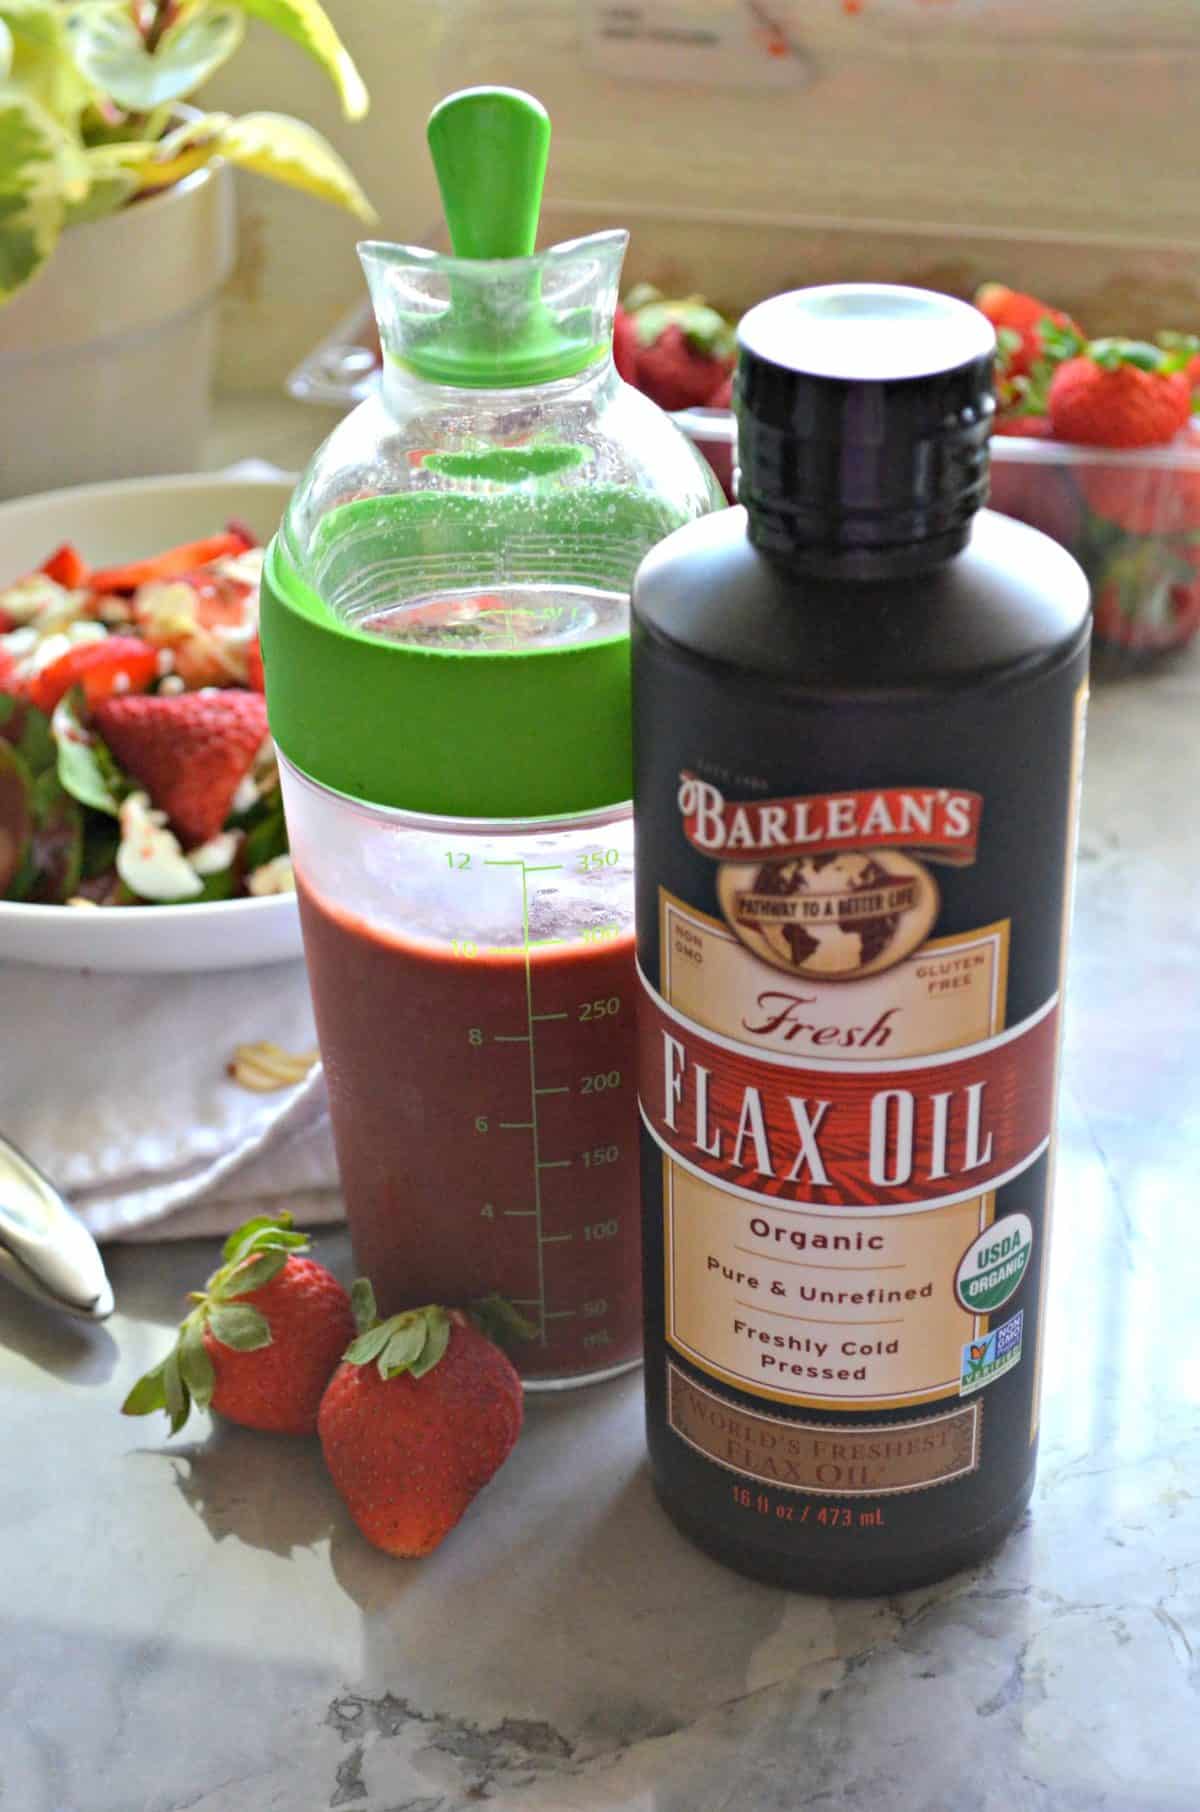 salad dressing container filled with pink seedy liquid next to barlean's fresh flax oil.